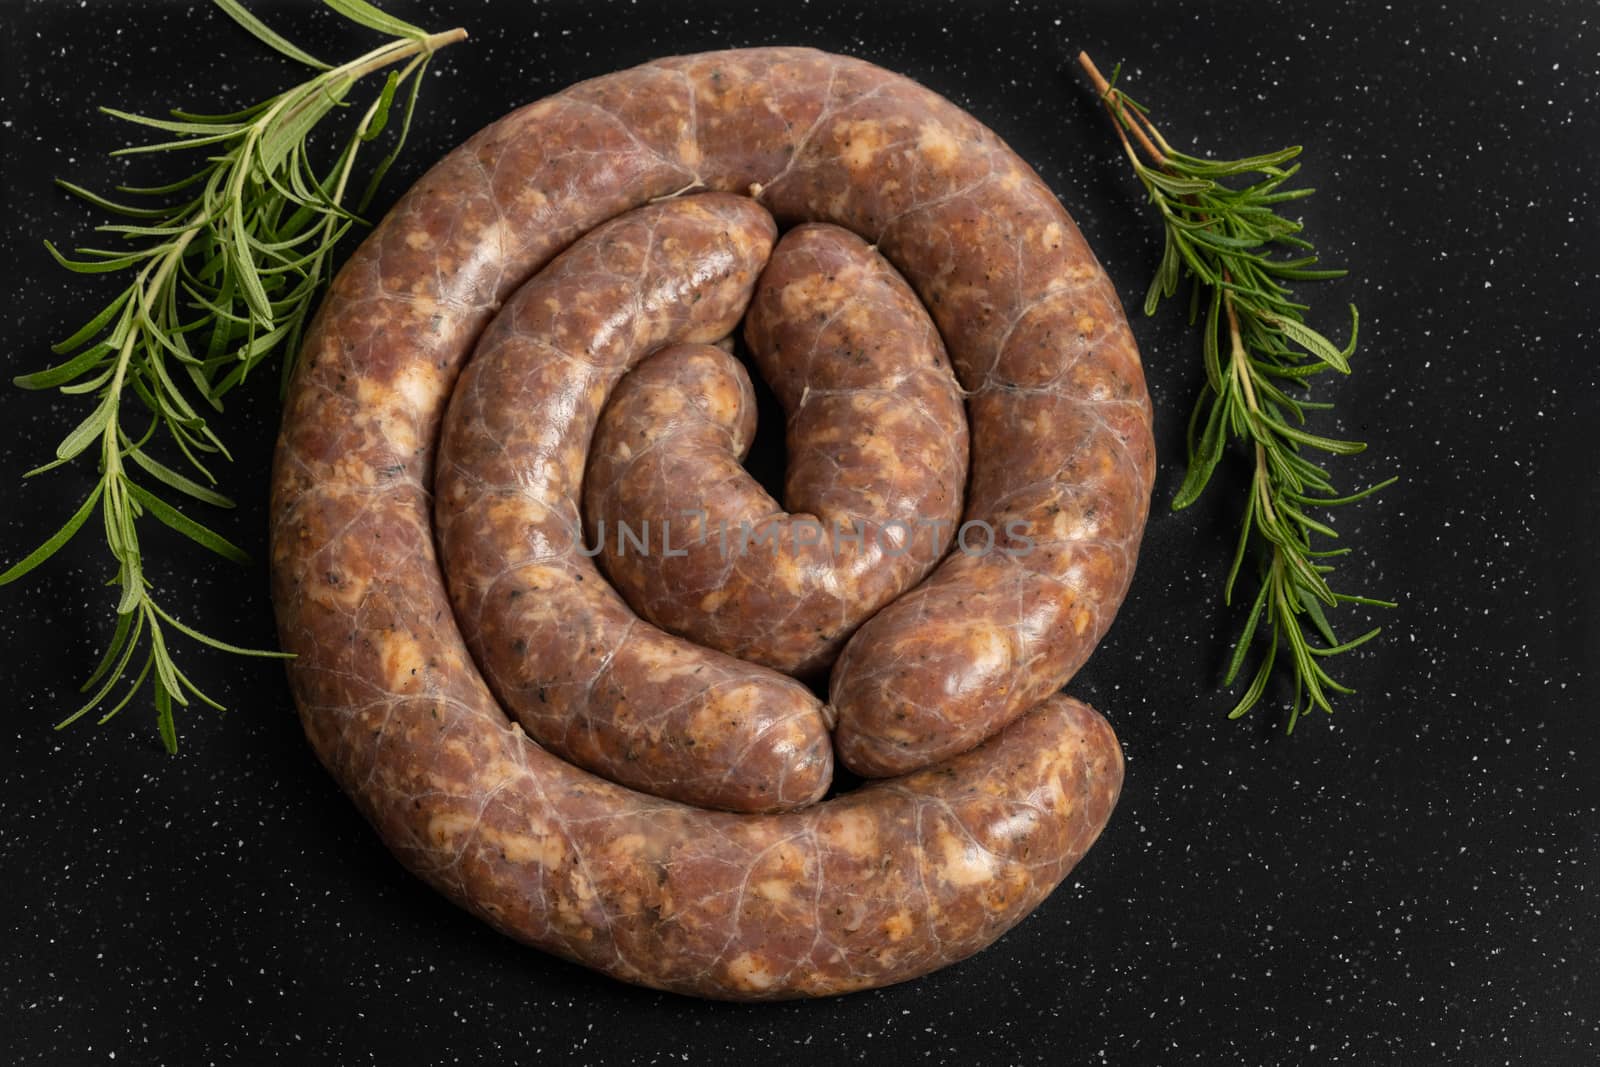 Raw homemade stuffed pork sausages and rosmarin isolated on a black background.